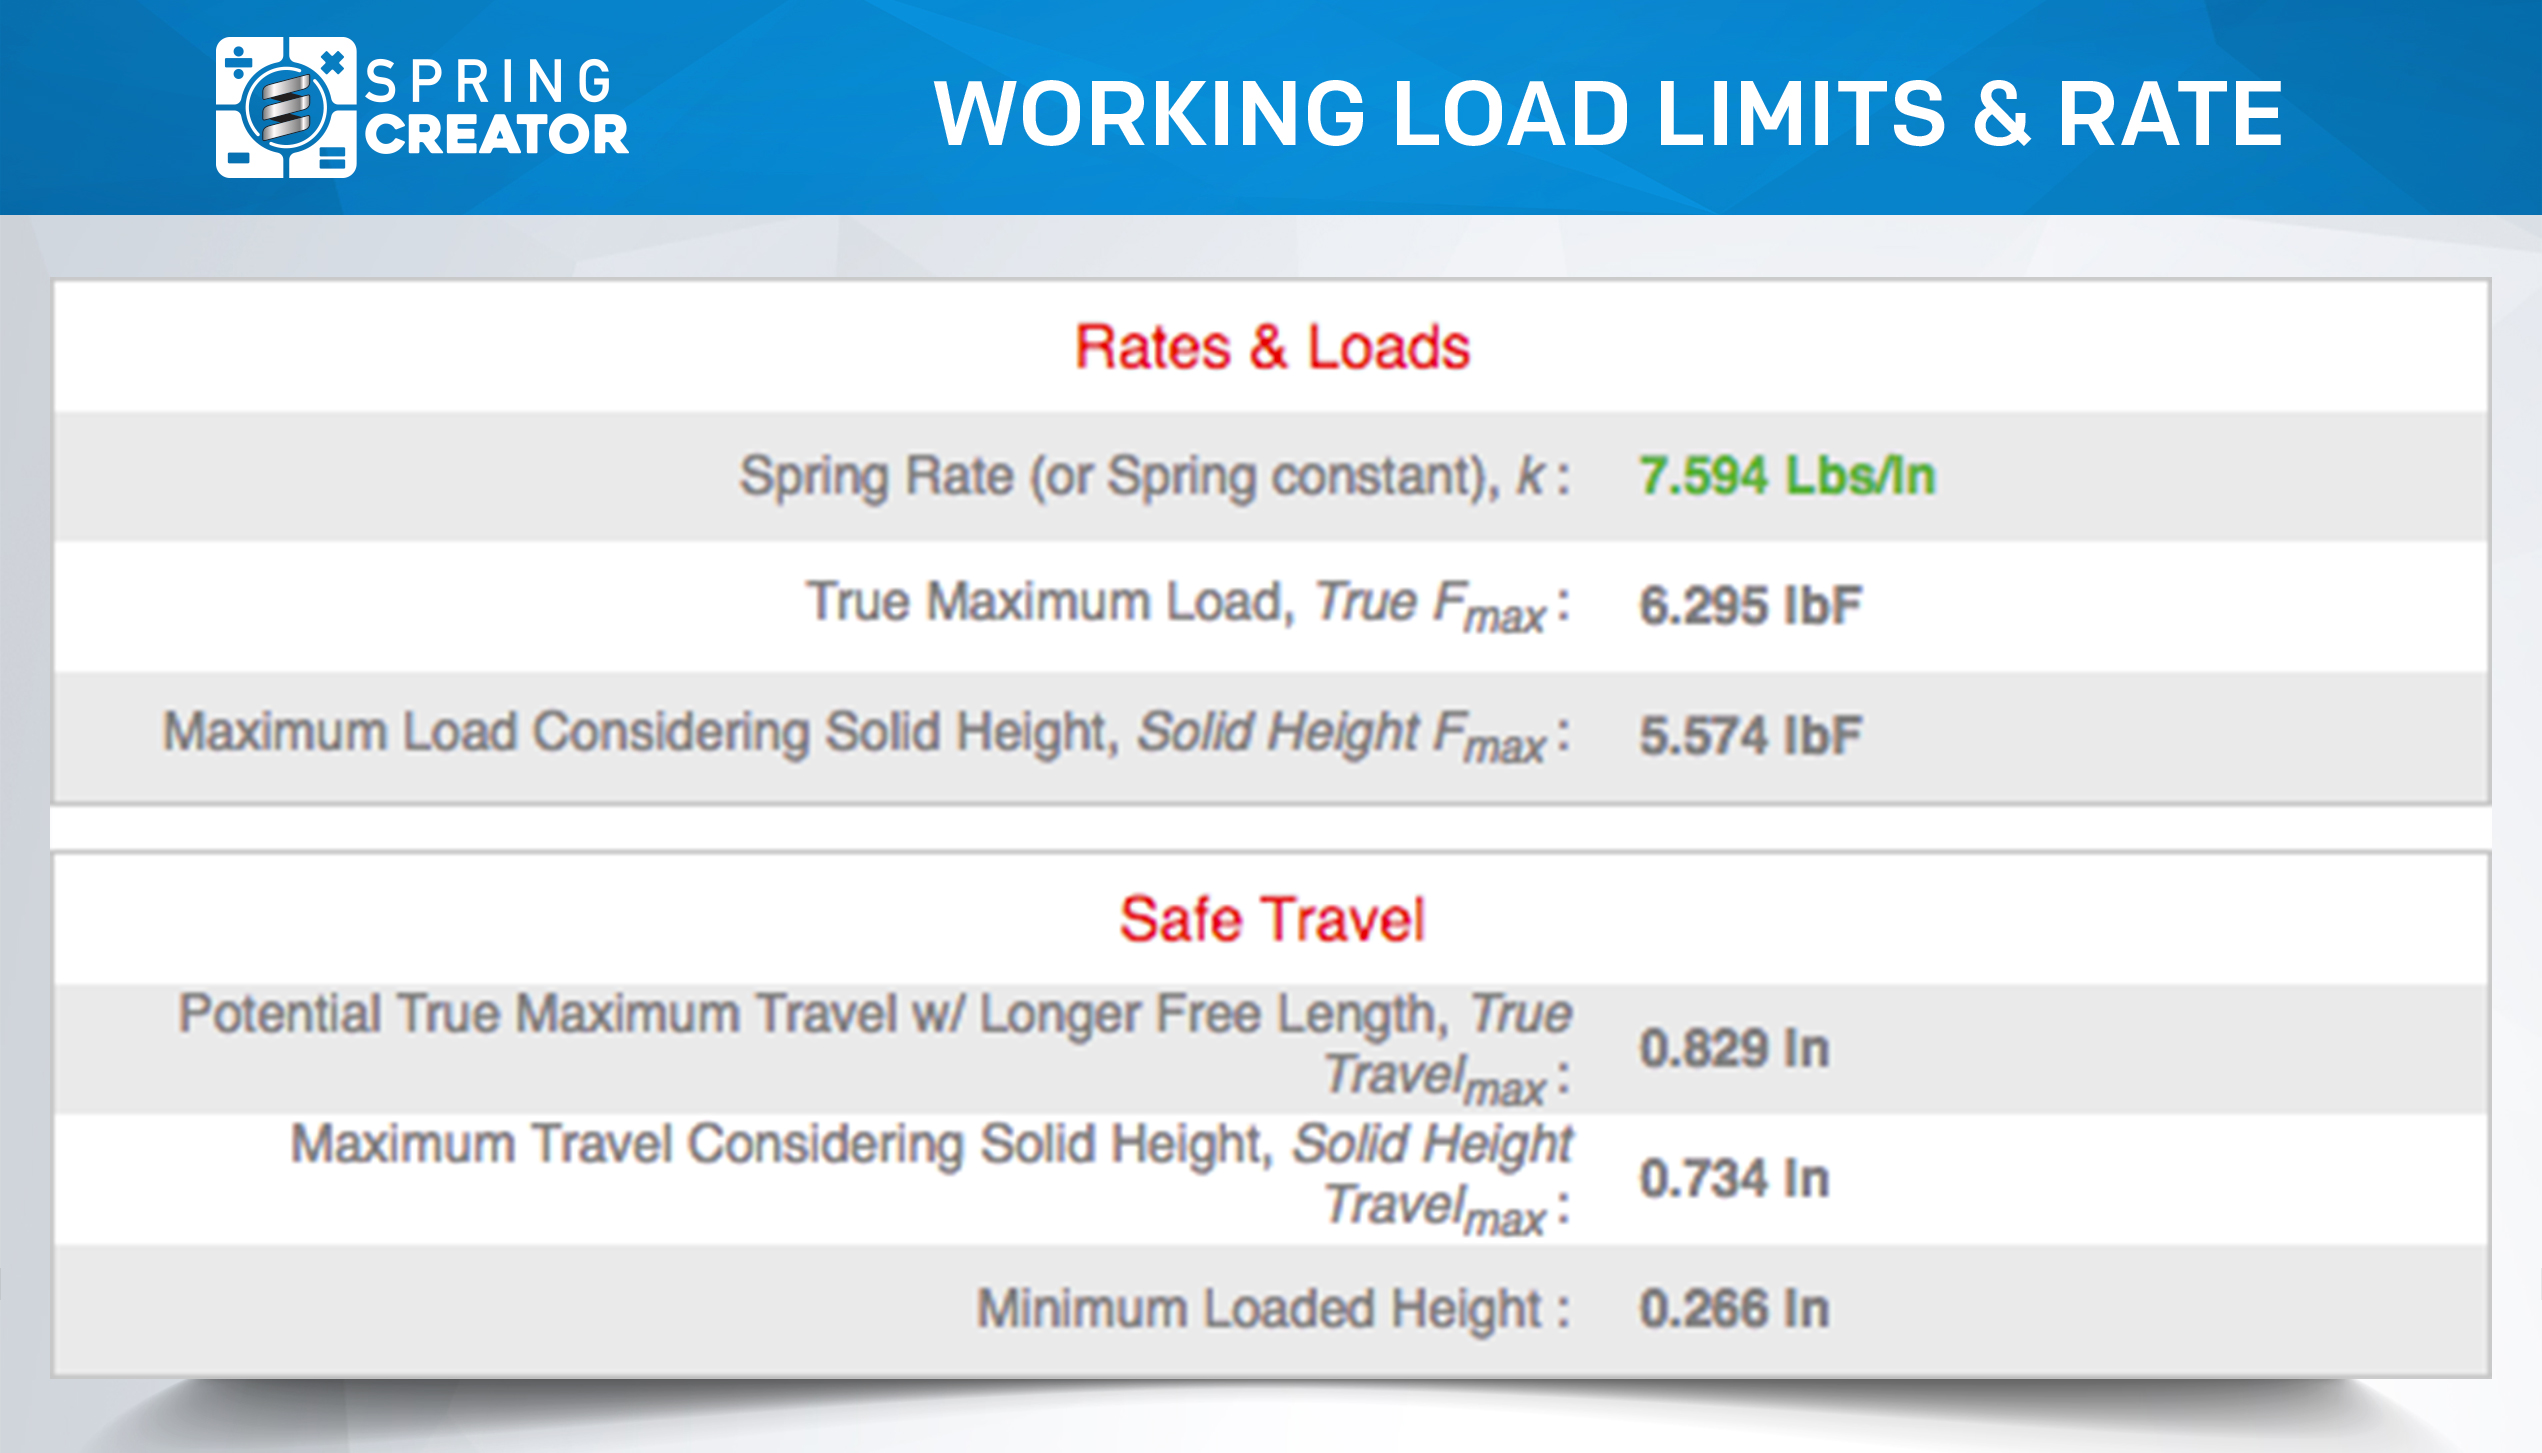 working load limits (maximum load considering solid height and maximum travel considering solid height) shown in Spring Creator calculator